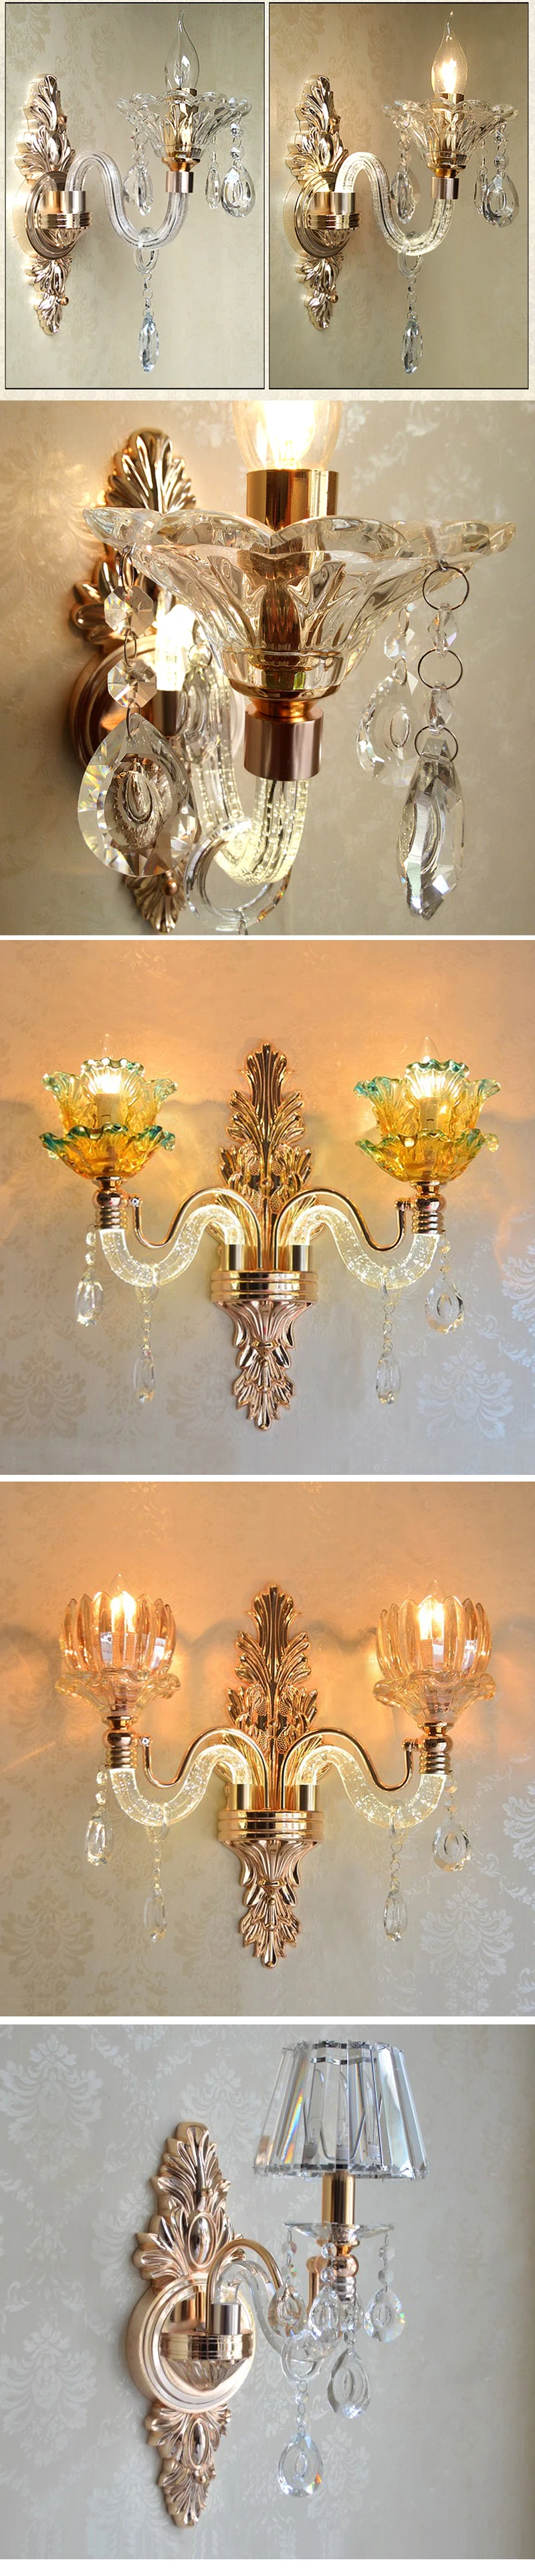 Zhongshan Hotel Classic Art Deco Living Room Bedside Luxury Wall Mount Light Gold Iron Crystal Wall Lamp For Home Bedroom